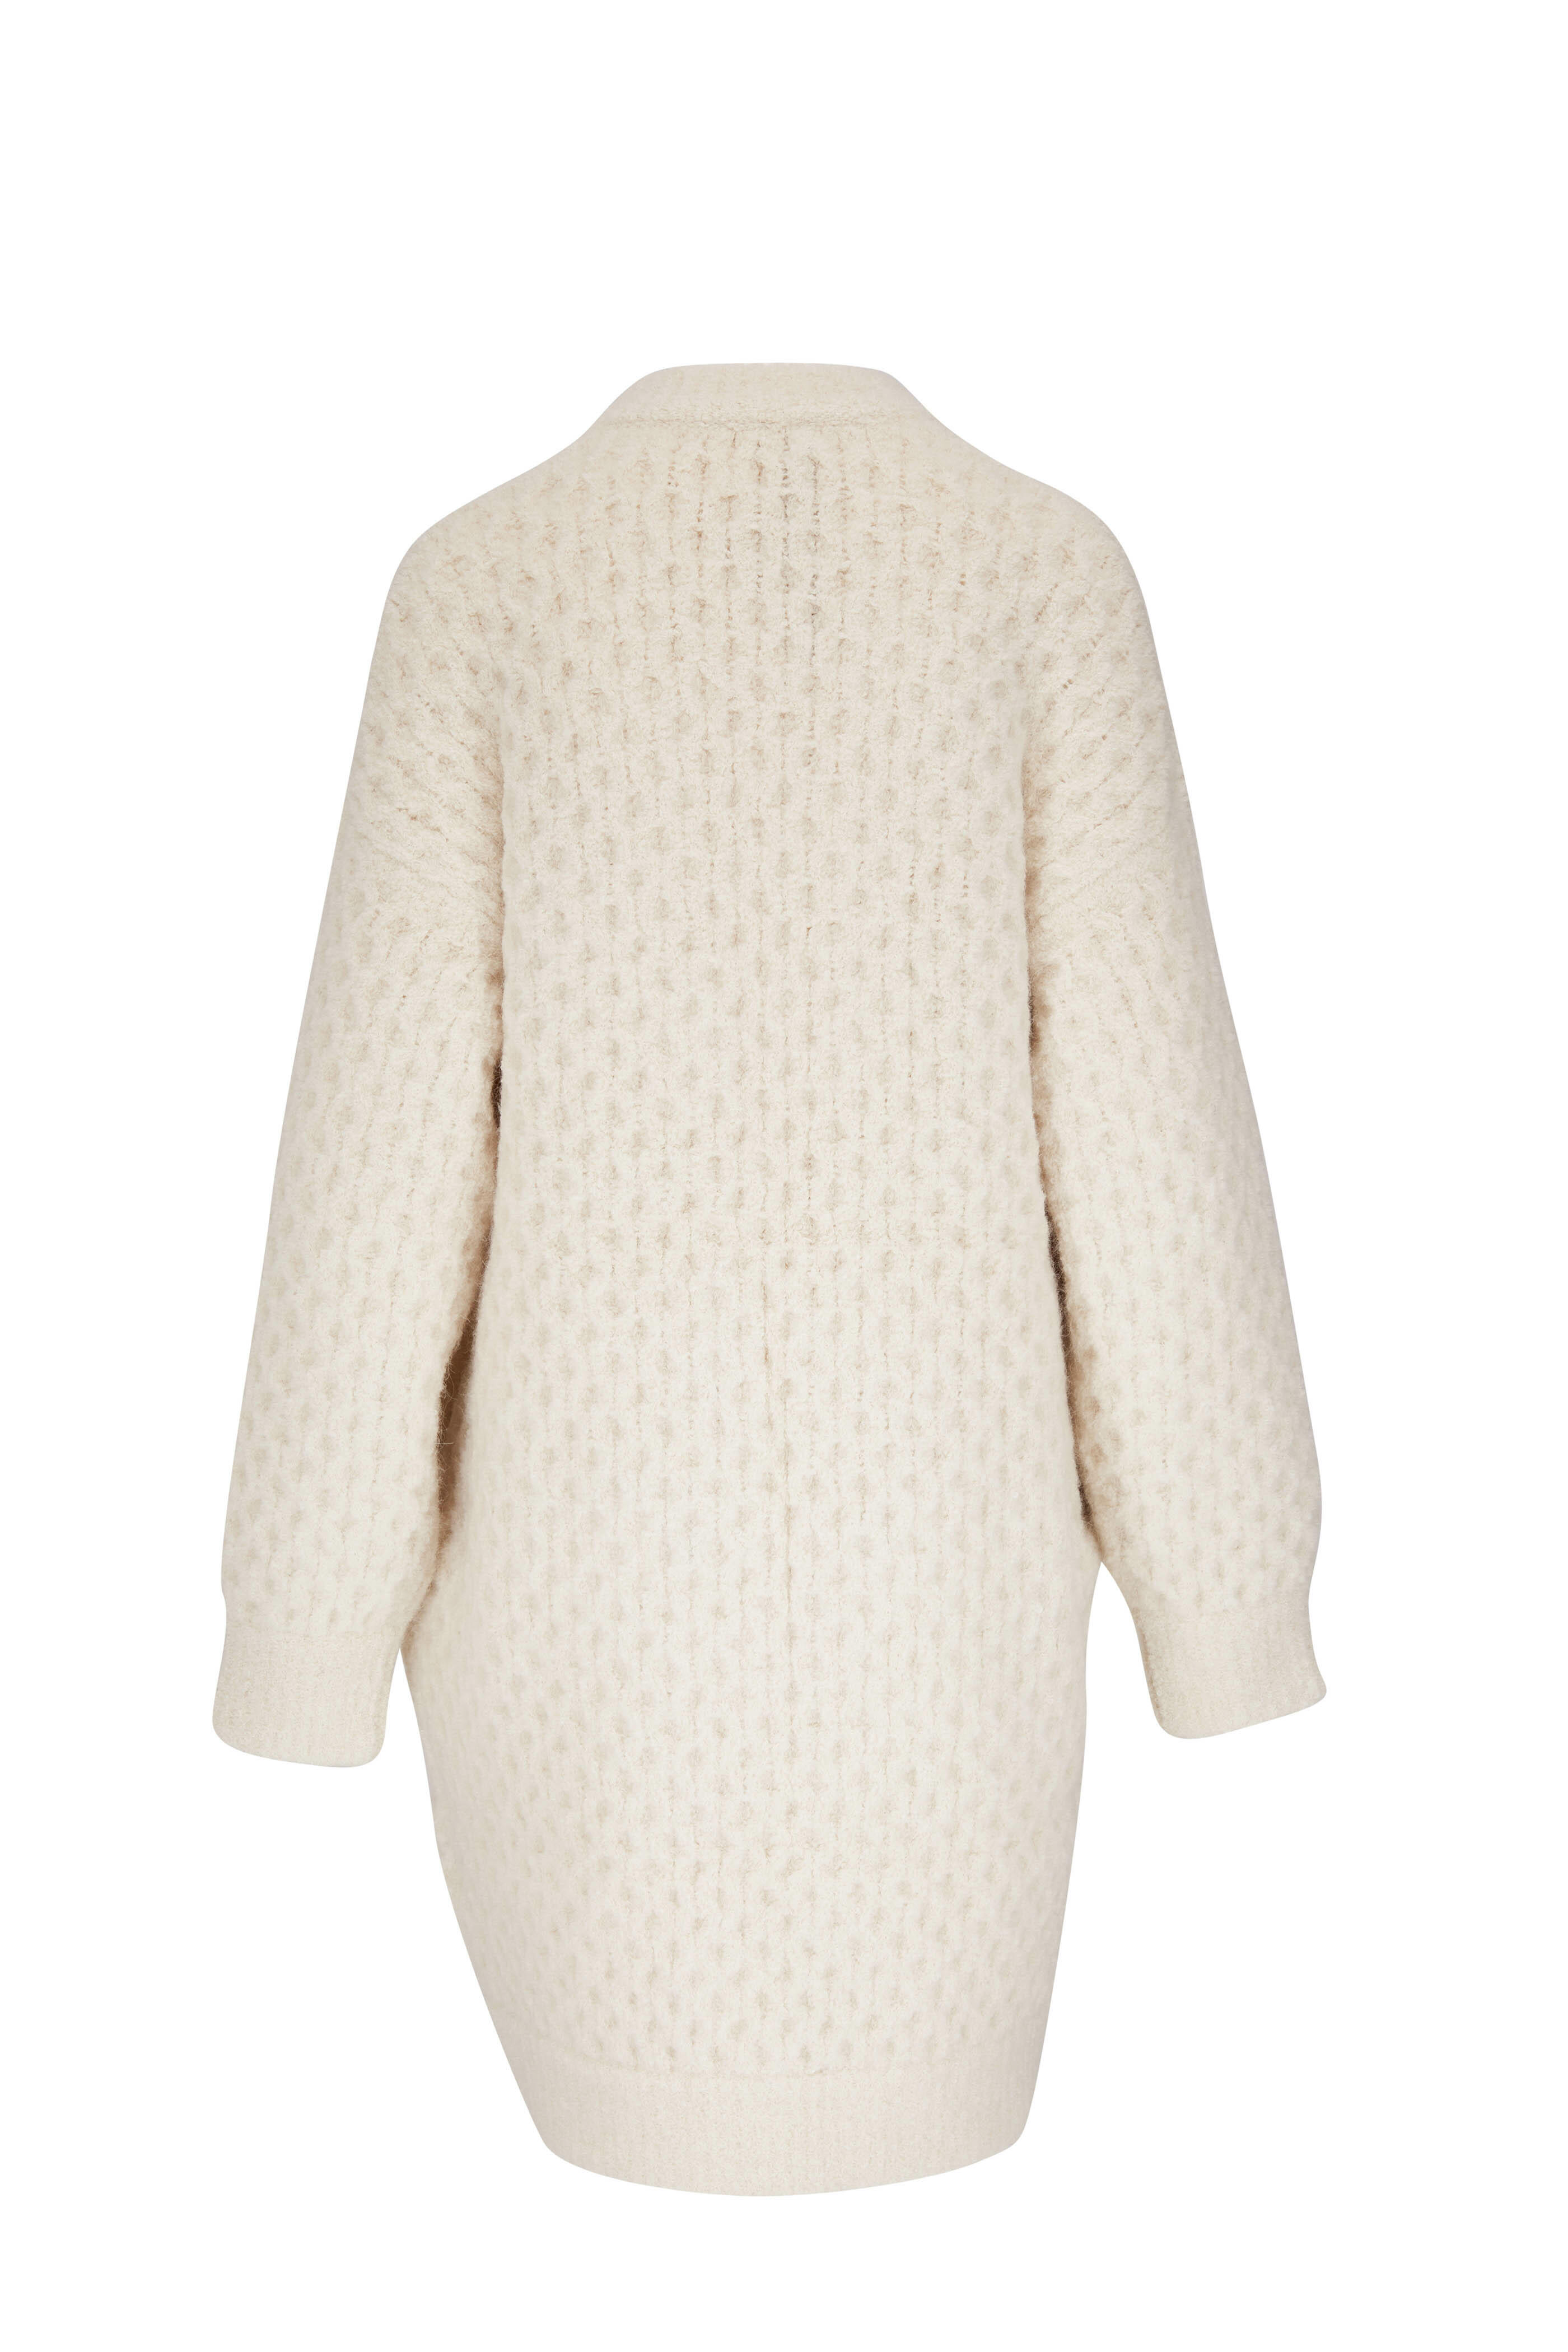 CO Collection - Ivory Alpaca Knit Cardigan | Mitchell Stores